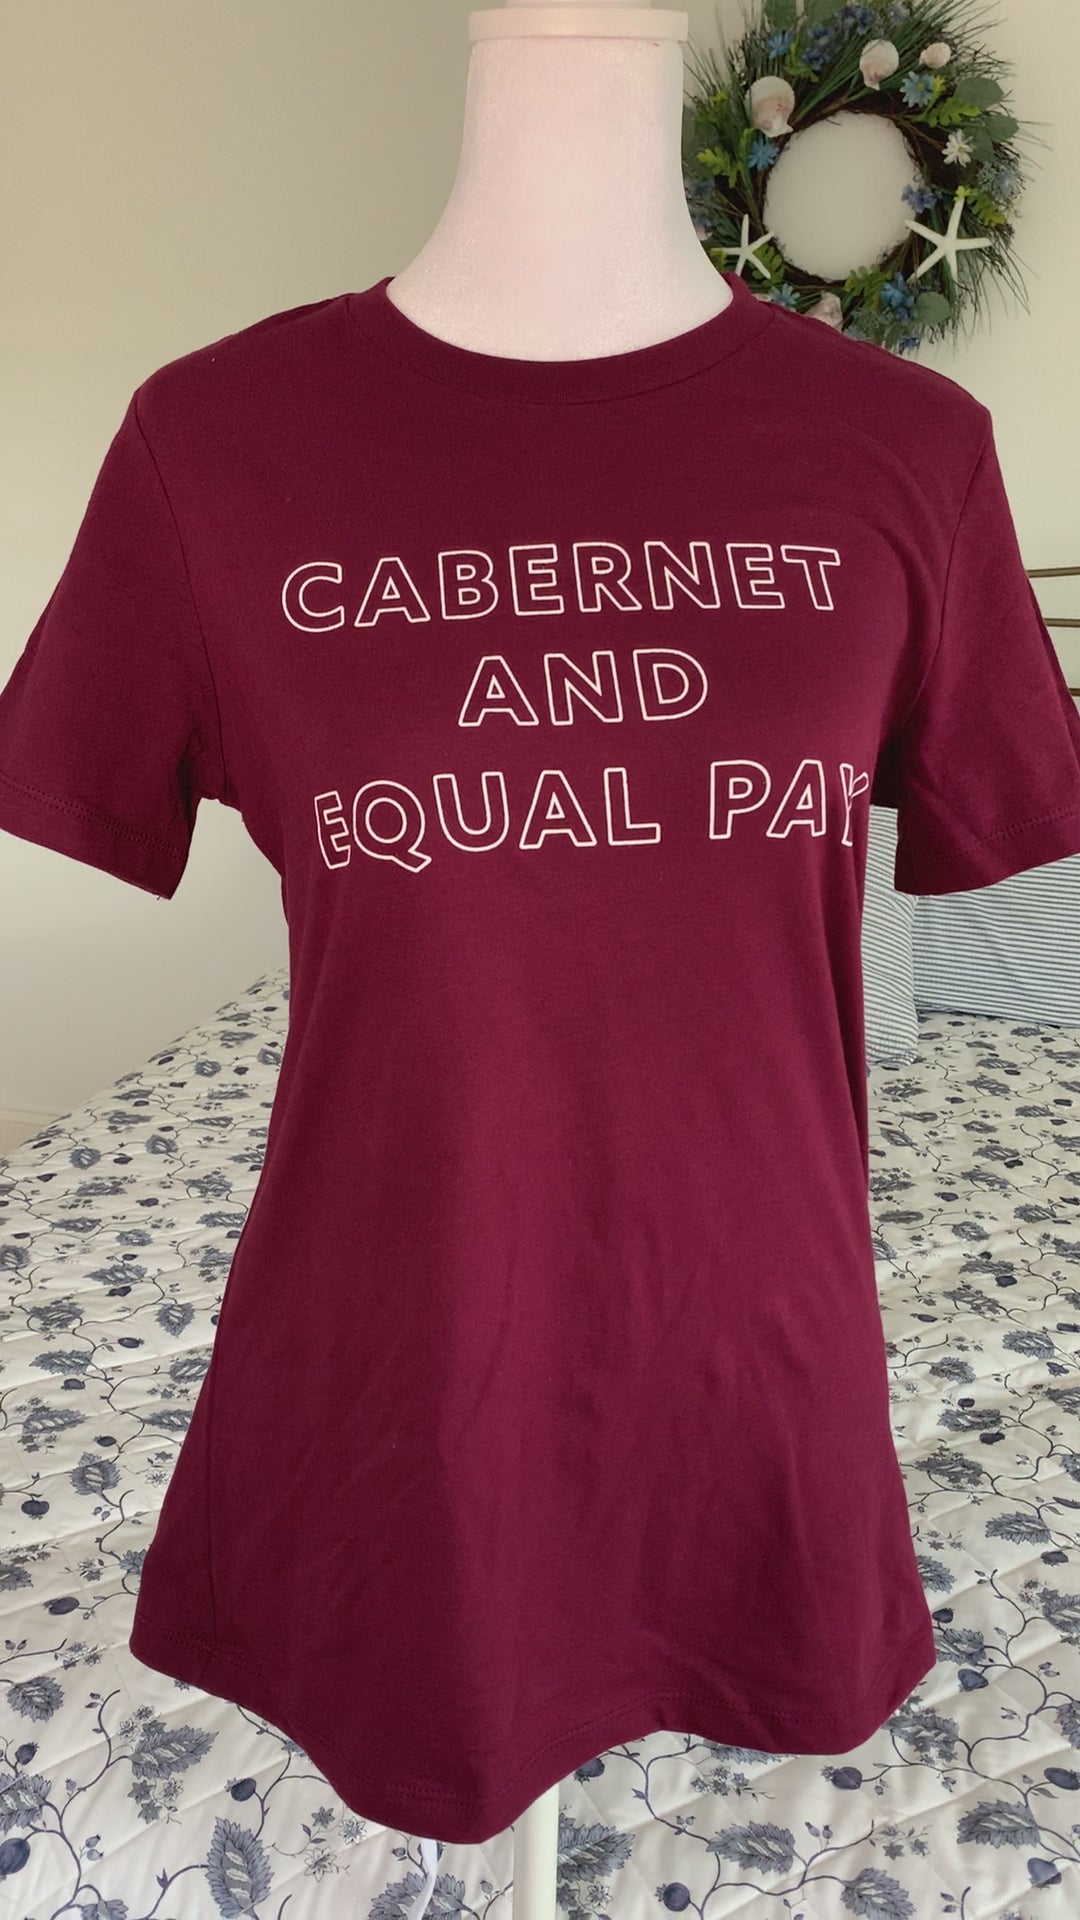 A maroon t-shirt that reads "Cabernet and Equal Pay" hangs on a manikin